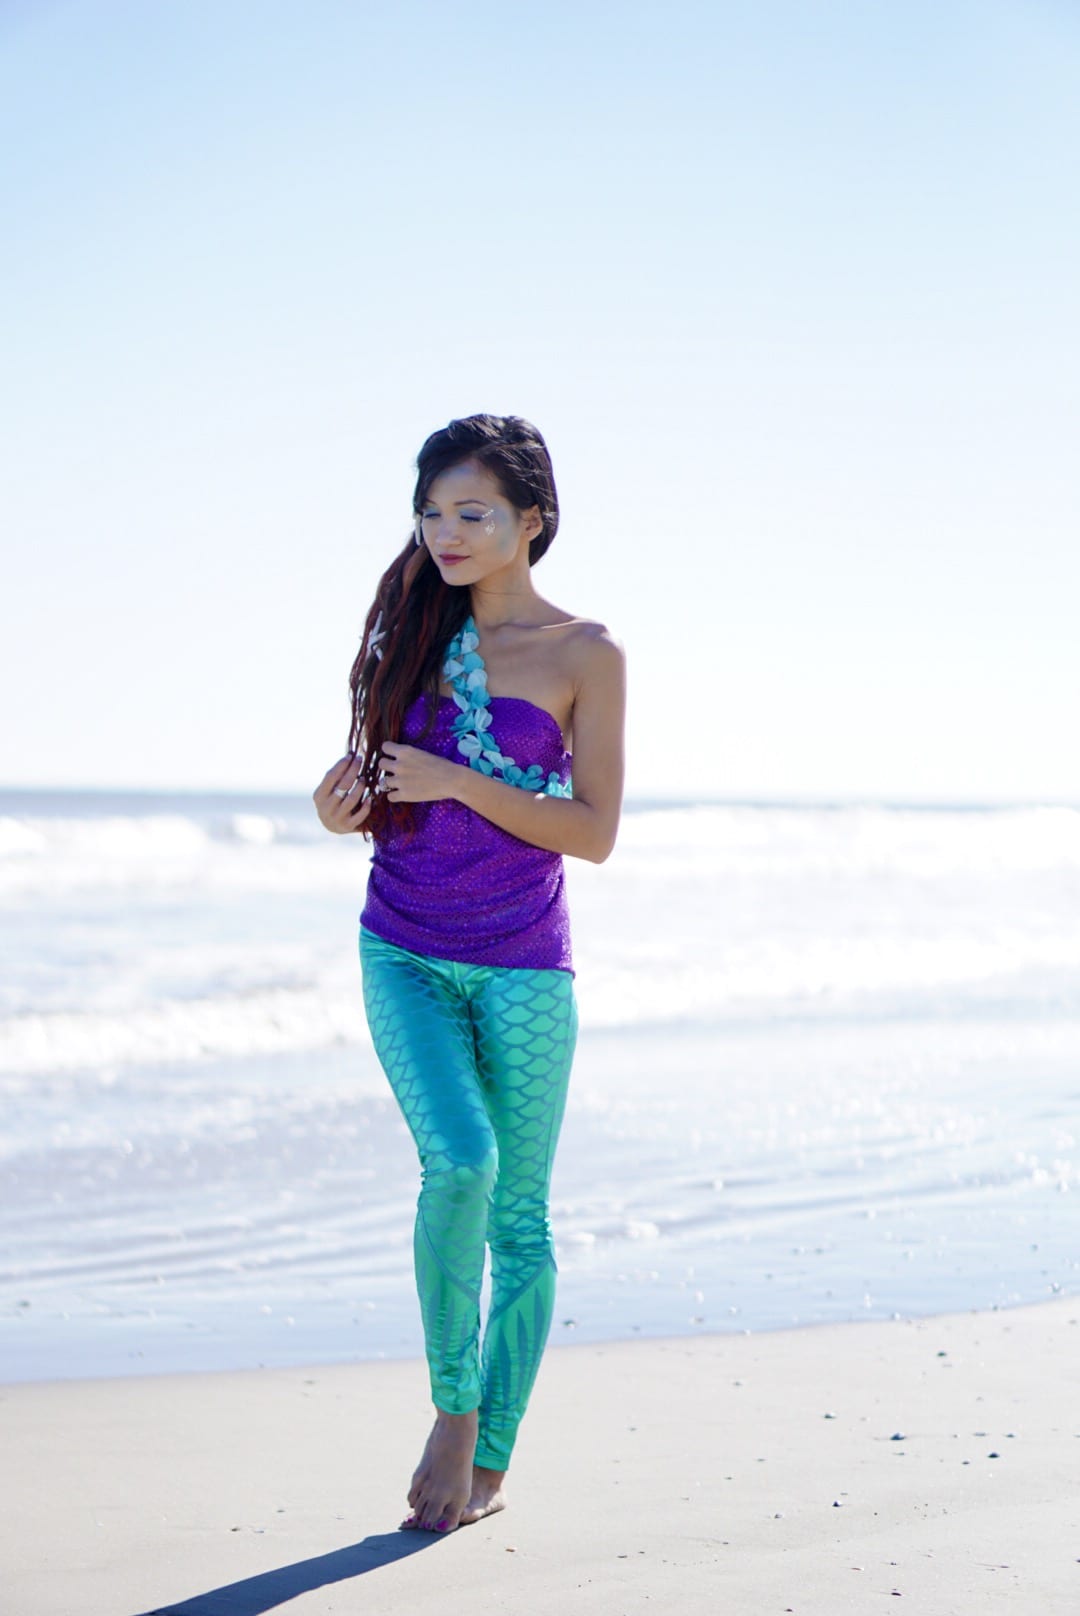 Octopus Mermaid Pattern With Fins Jelly Fish 3D Printed Skinny Workout  Leggings | eBay